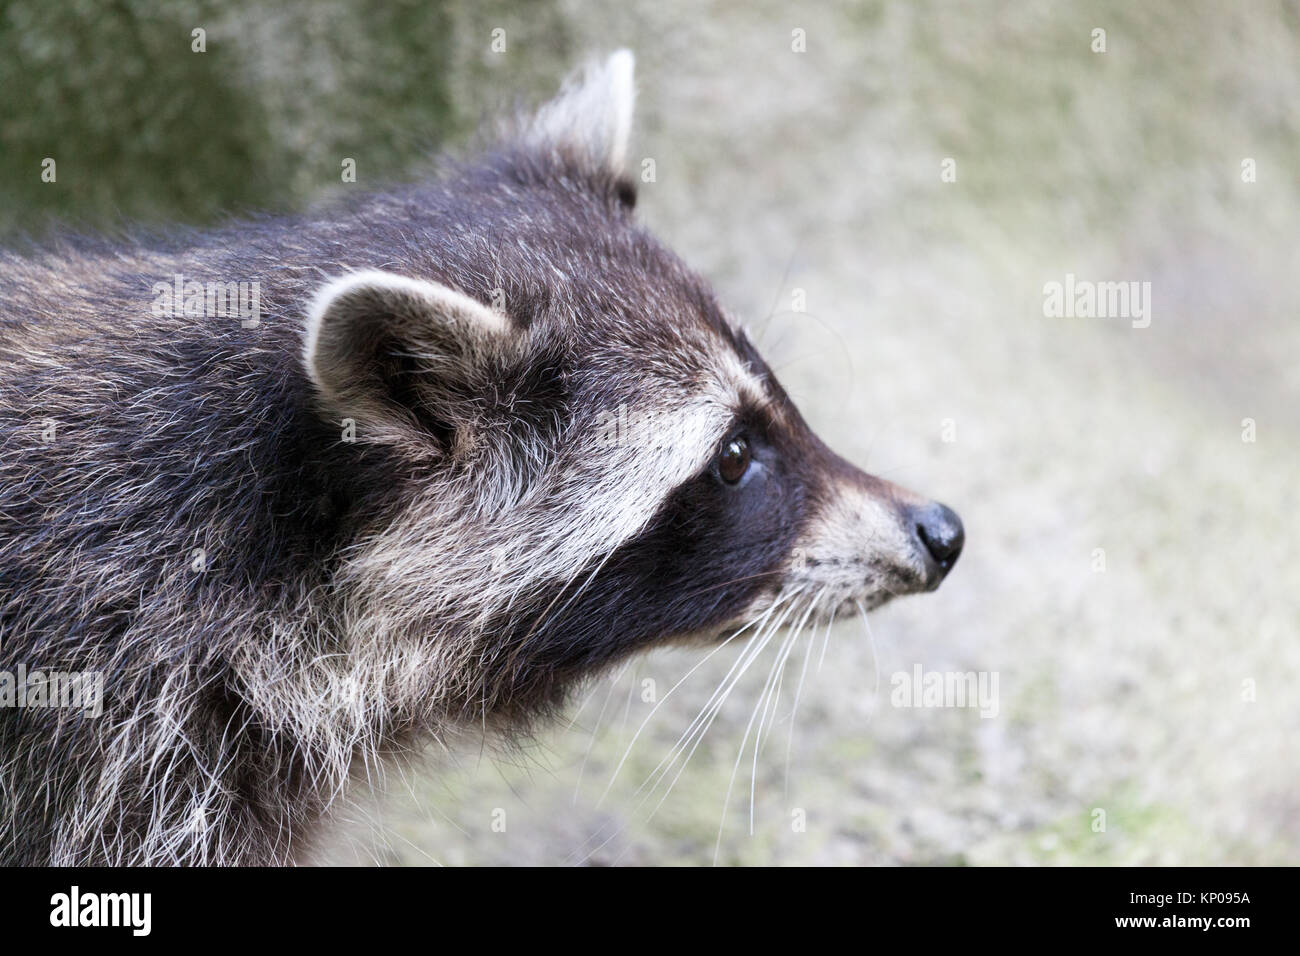 portrait of a racoon in a nature scene Stock Photo